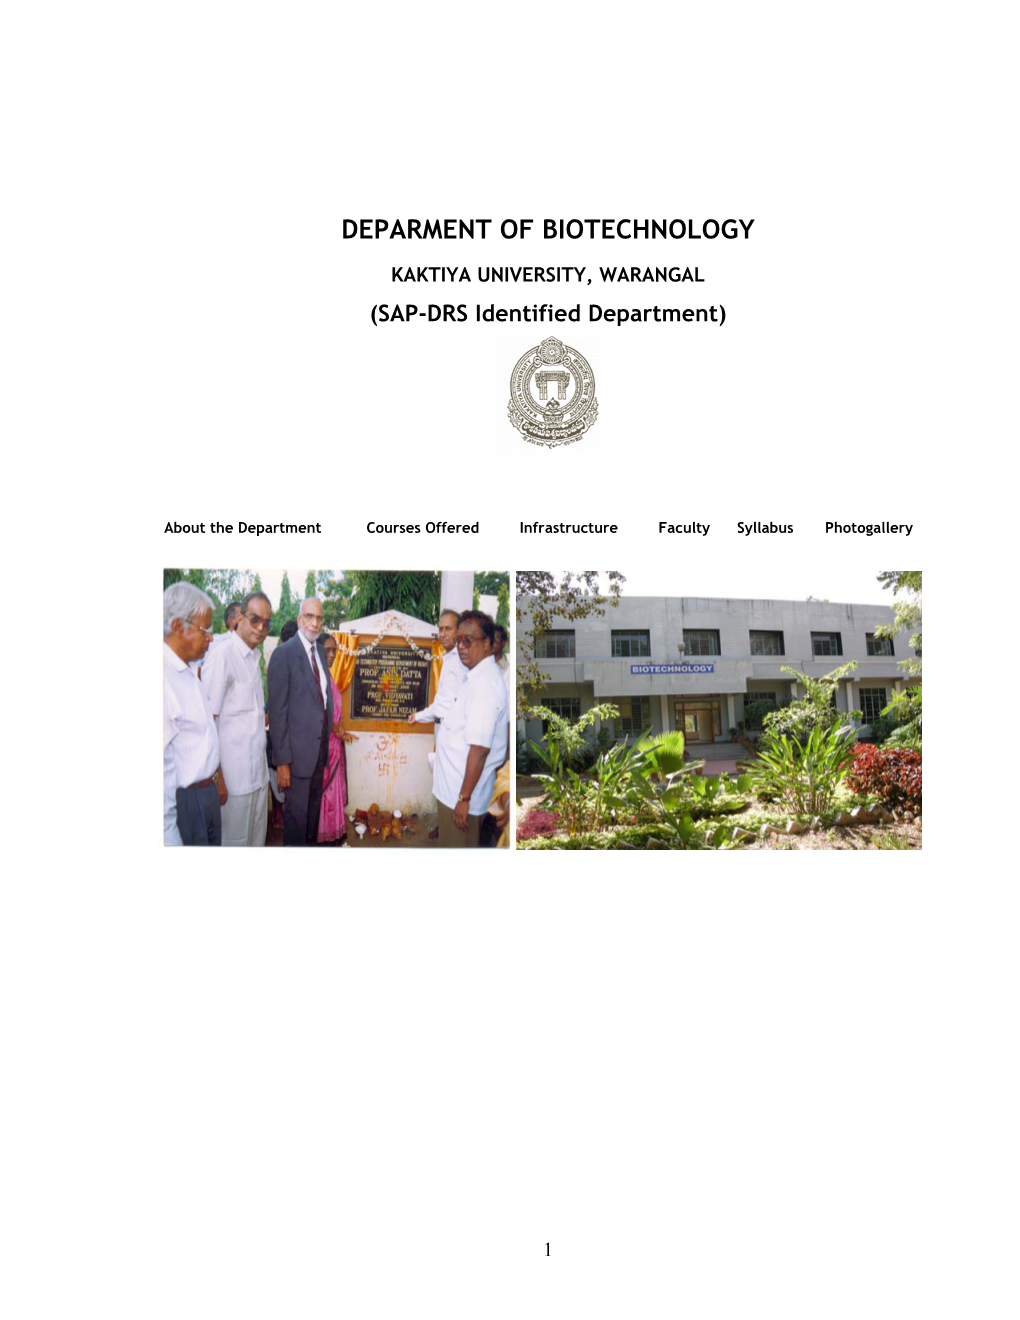 Deparment of Biotechnology